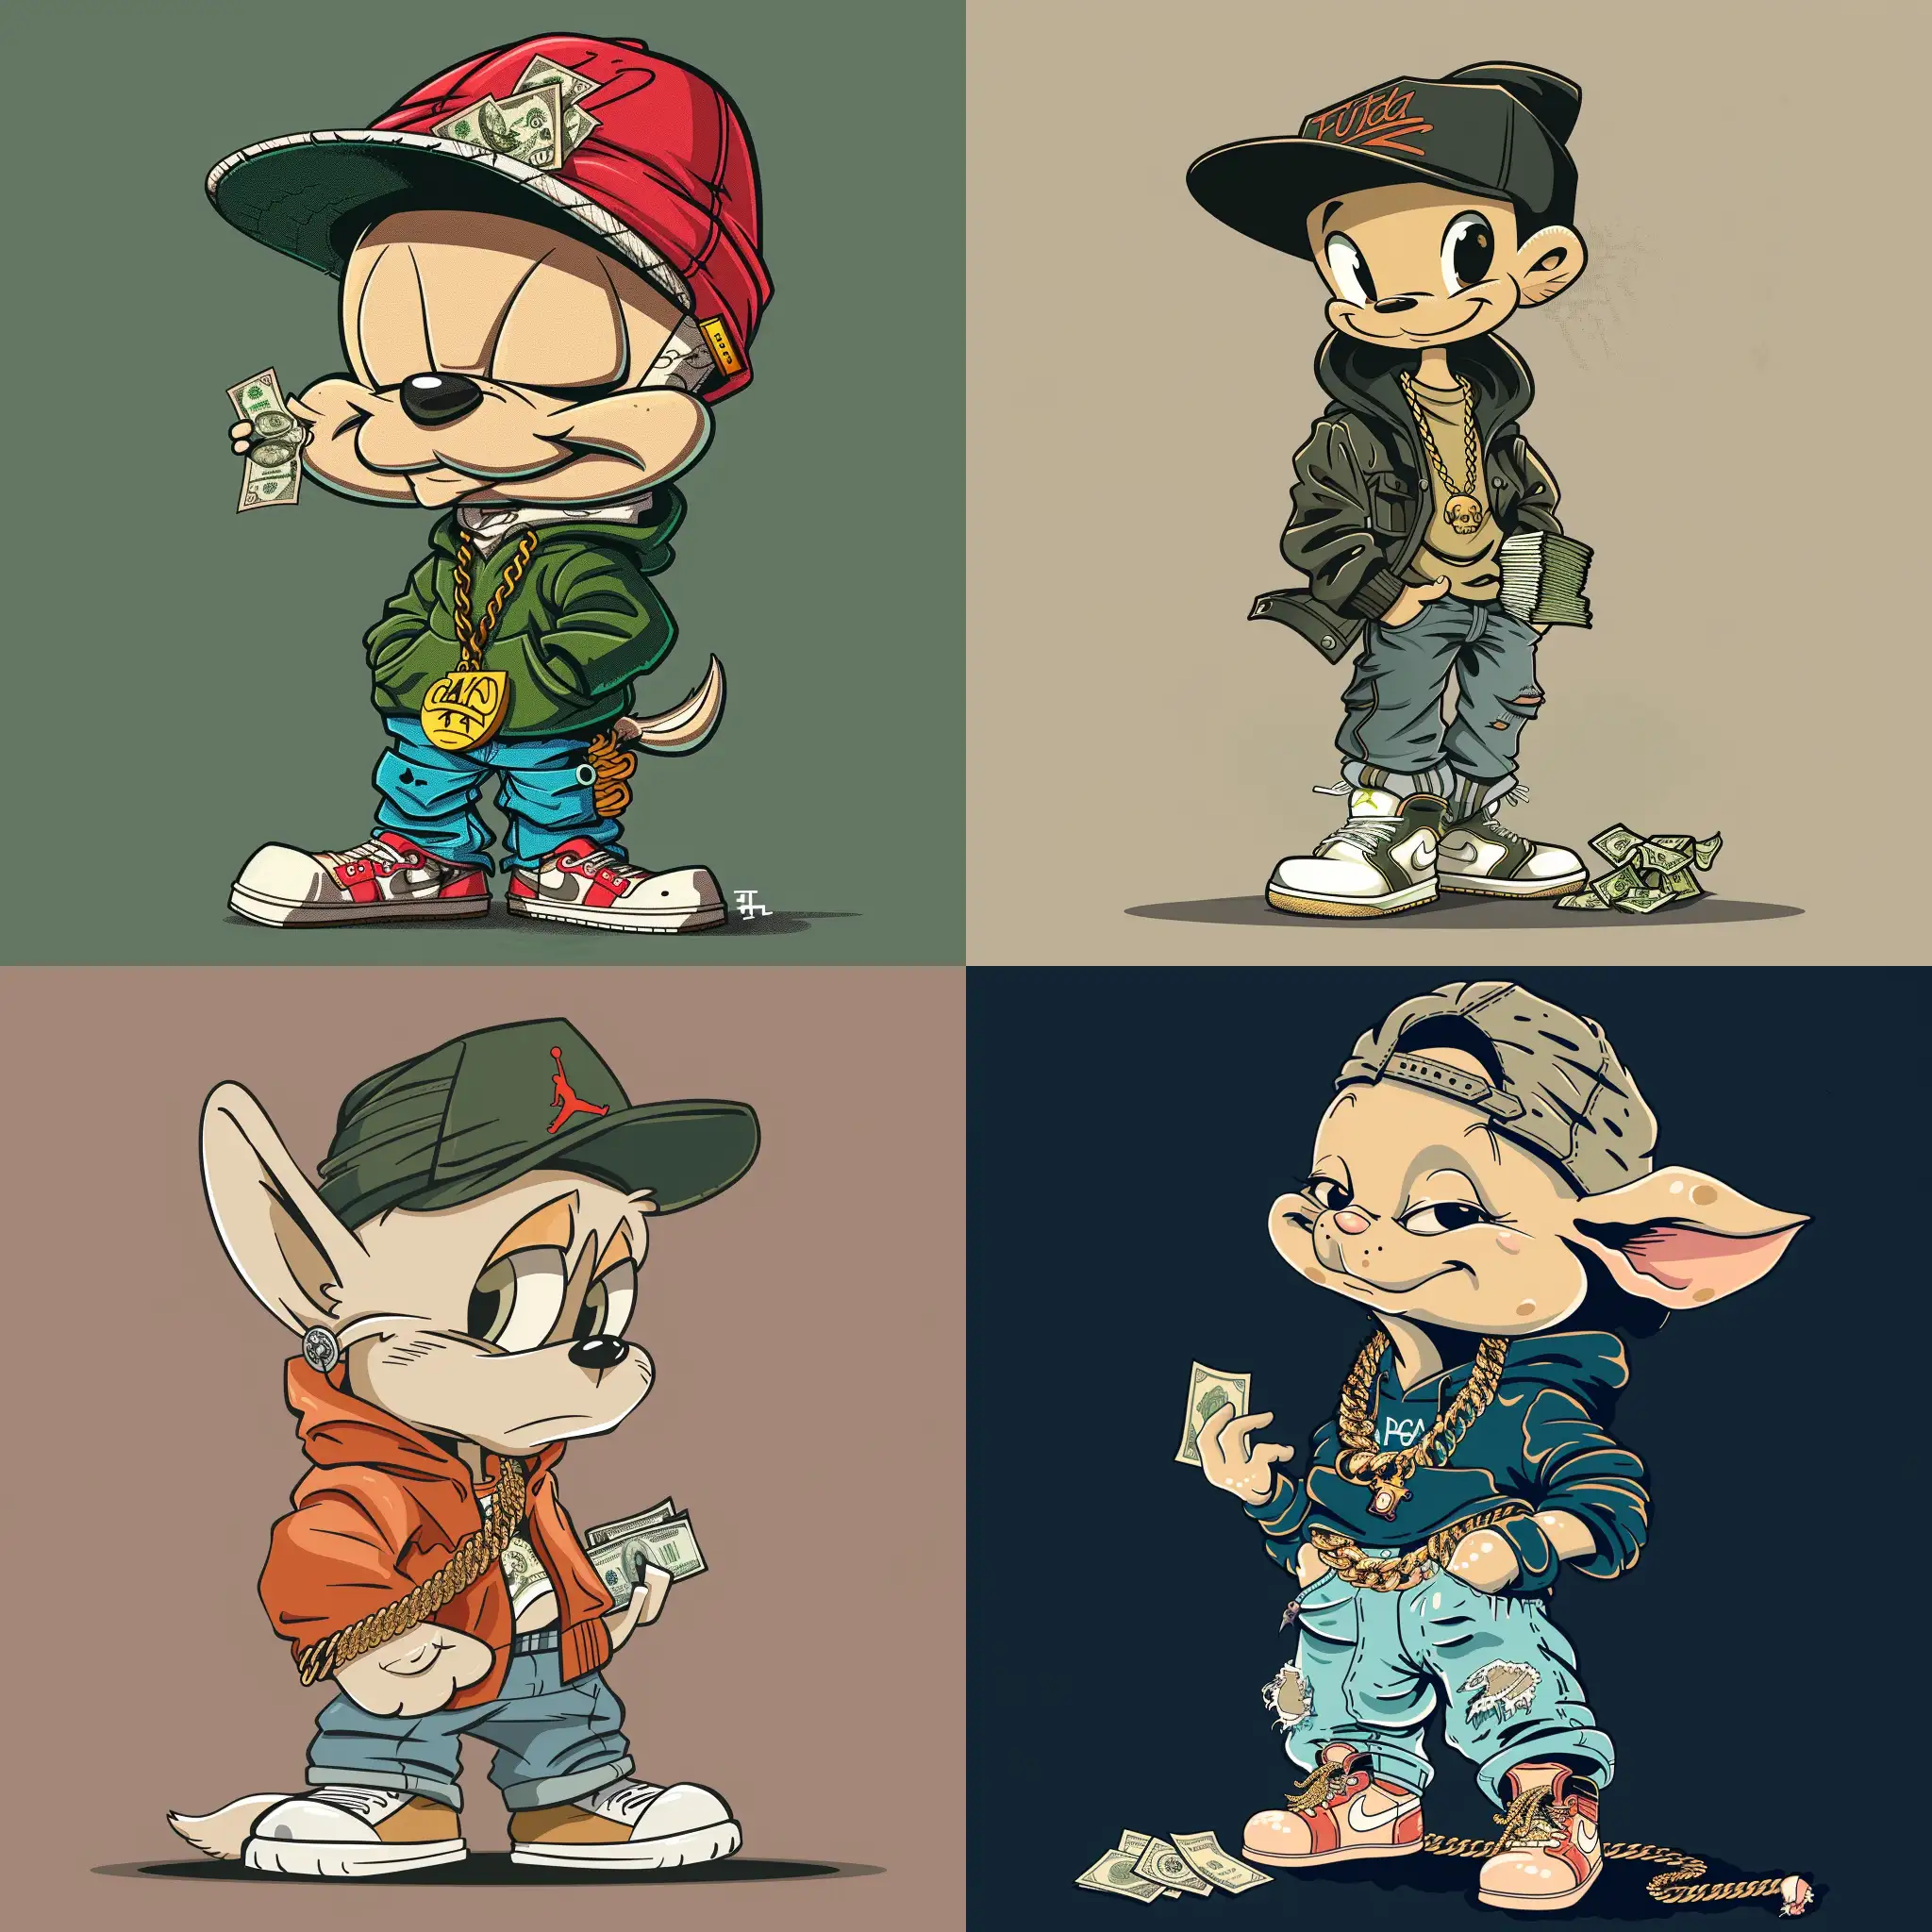 Elmer-Fudd-Looney-Tunes-Cartoon-Character-with-Snapback-Hat-and-Jordan-Retro-6-Shoes-Holding-Money-Stack